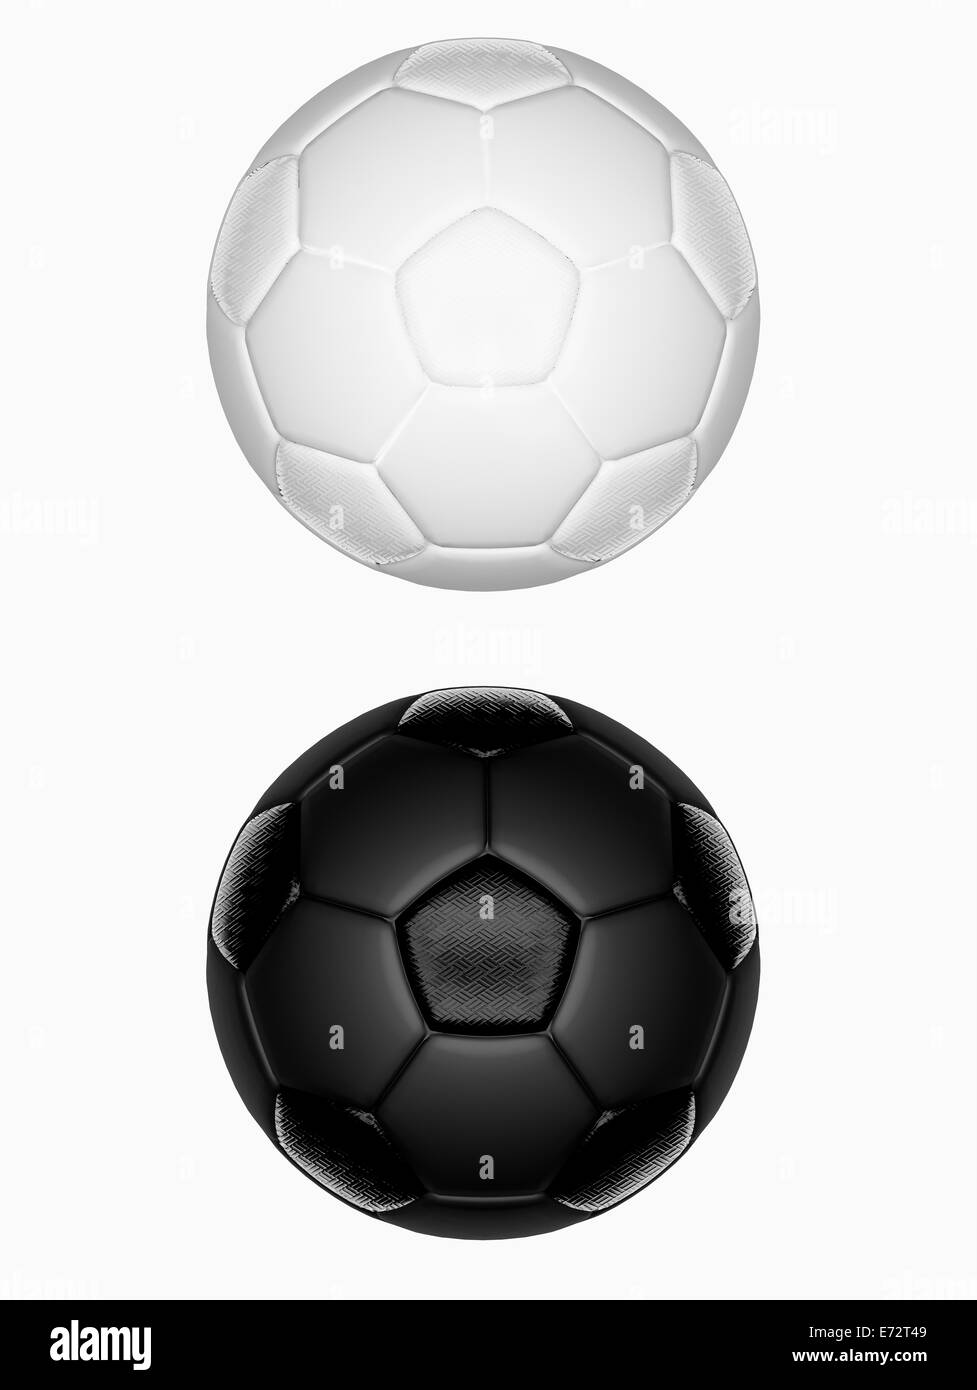 Black and white soccer balls isolated on white background Stock Photo